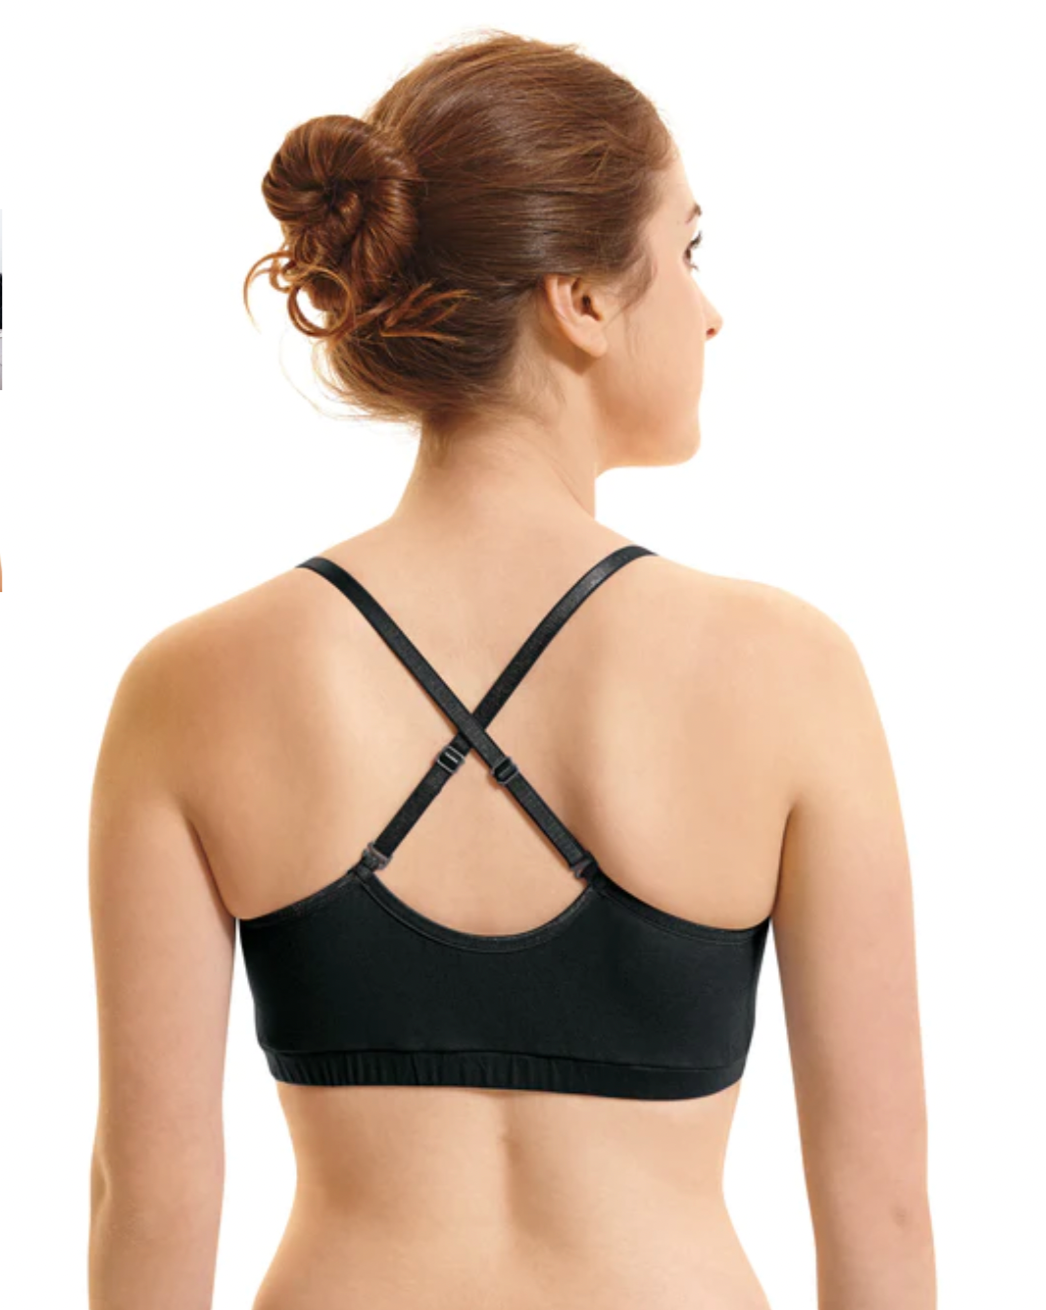 Blue Canoe - Bamboo Adjustable Bra Silver all things being eco chilliwack sustainable women's clothing boutique